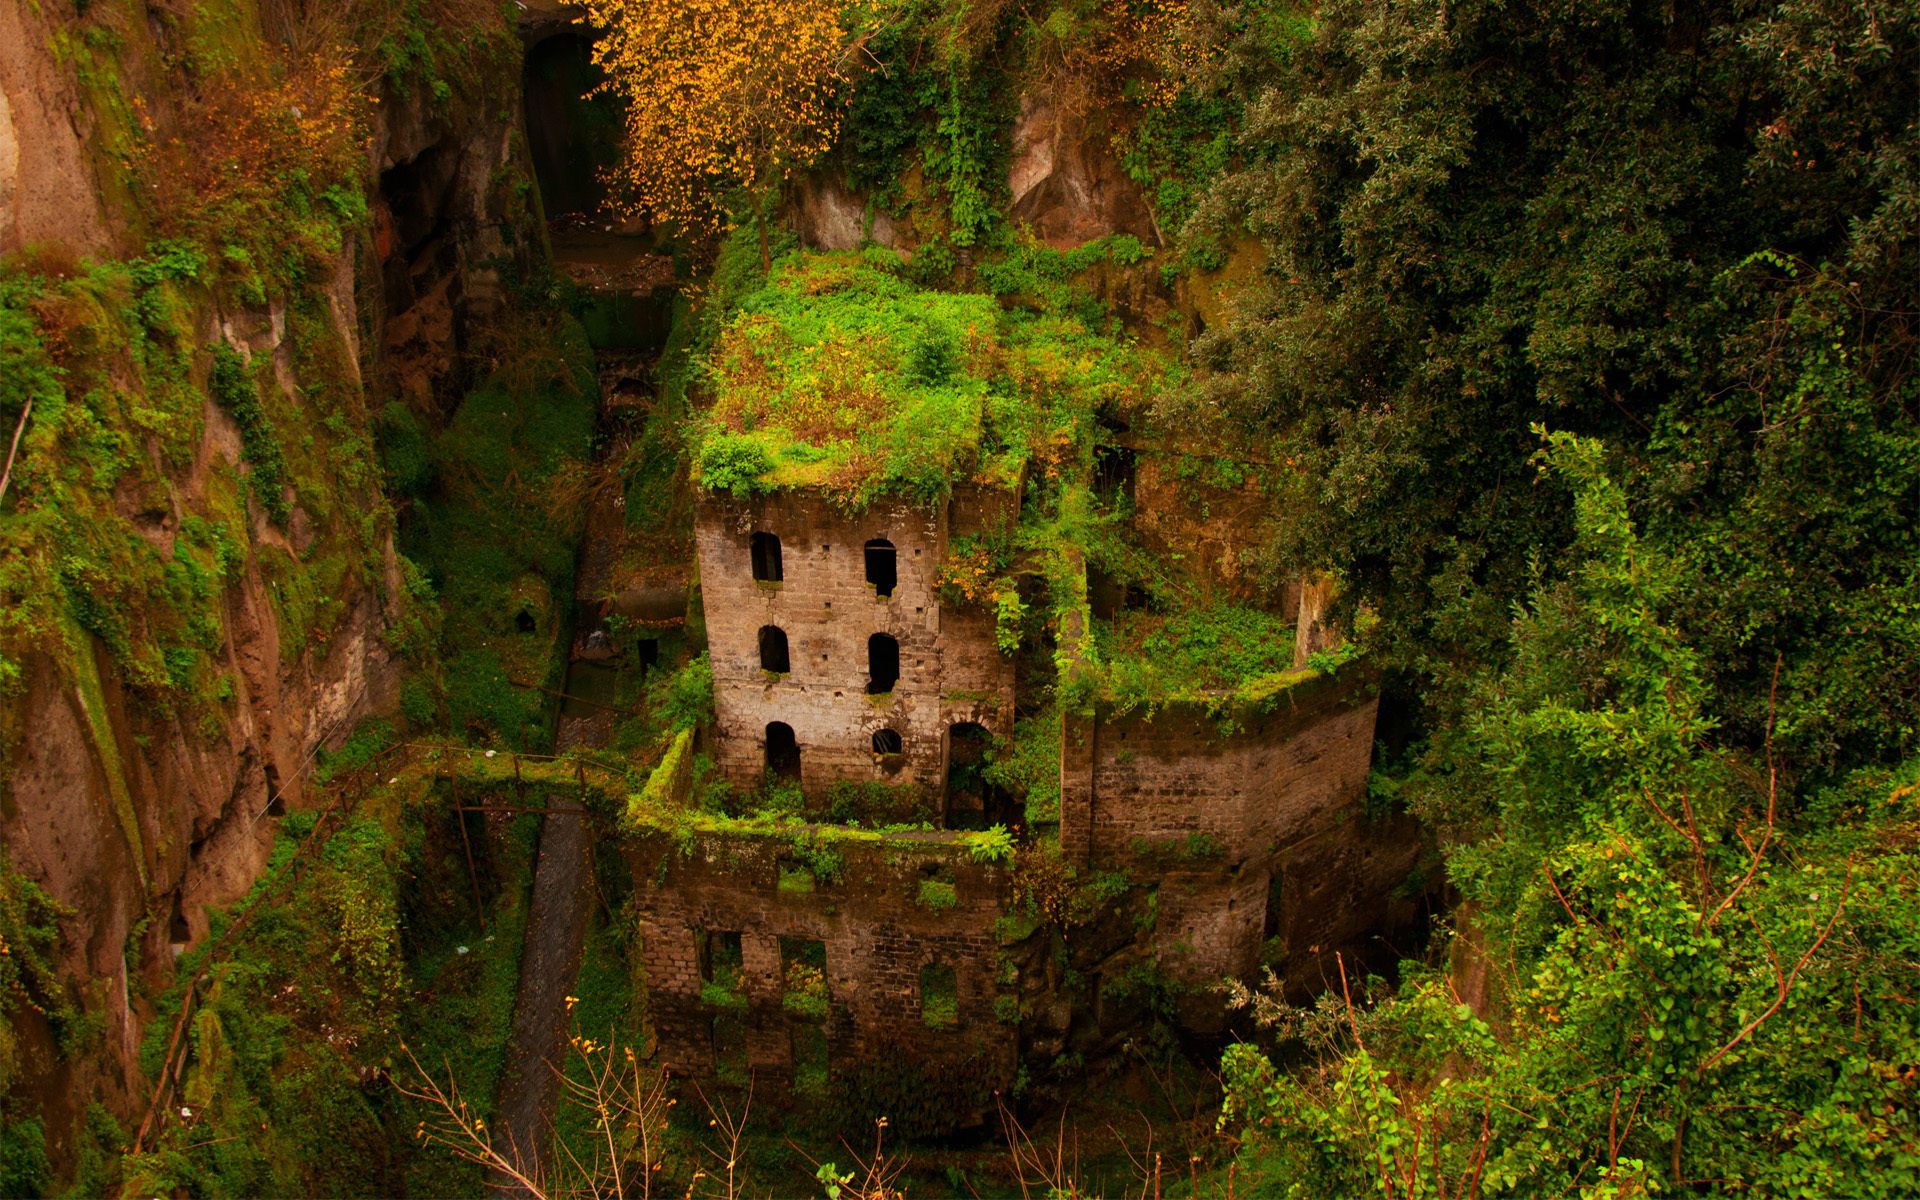 photography, Abandoned, Building, Old building, Ruin, Overgrown, Trees, Monastery, Italy, Valley Wallpaper